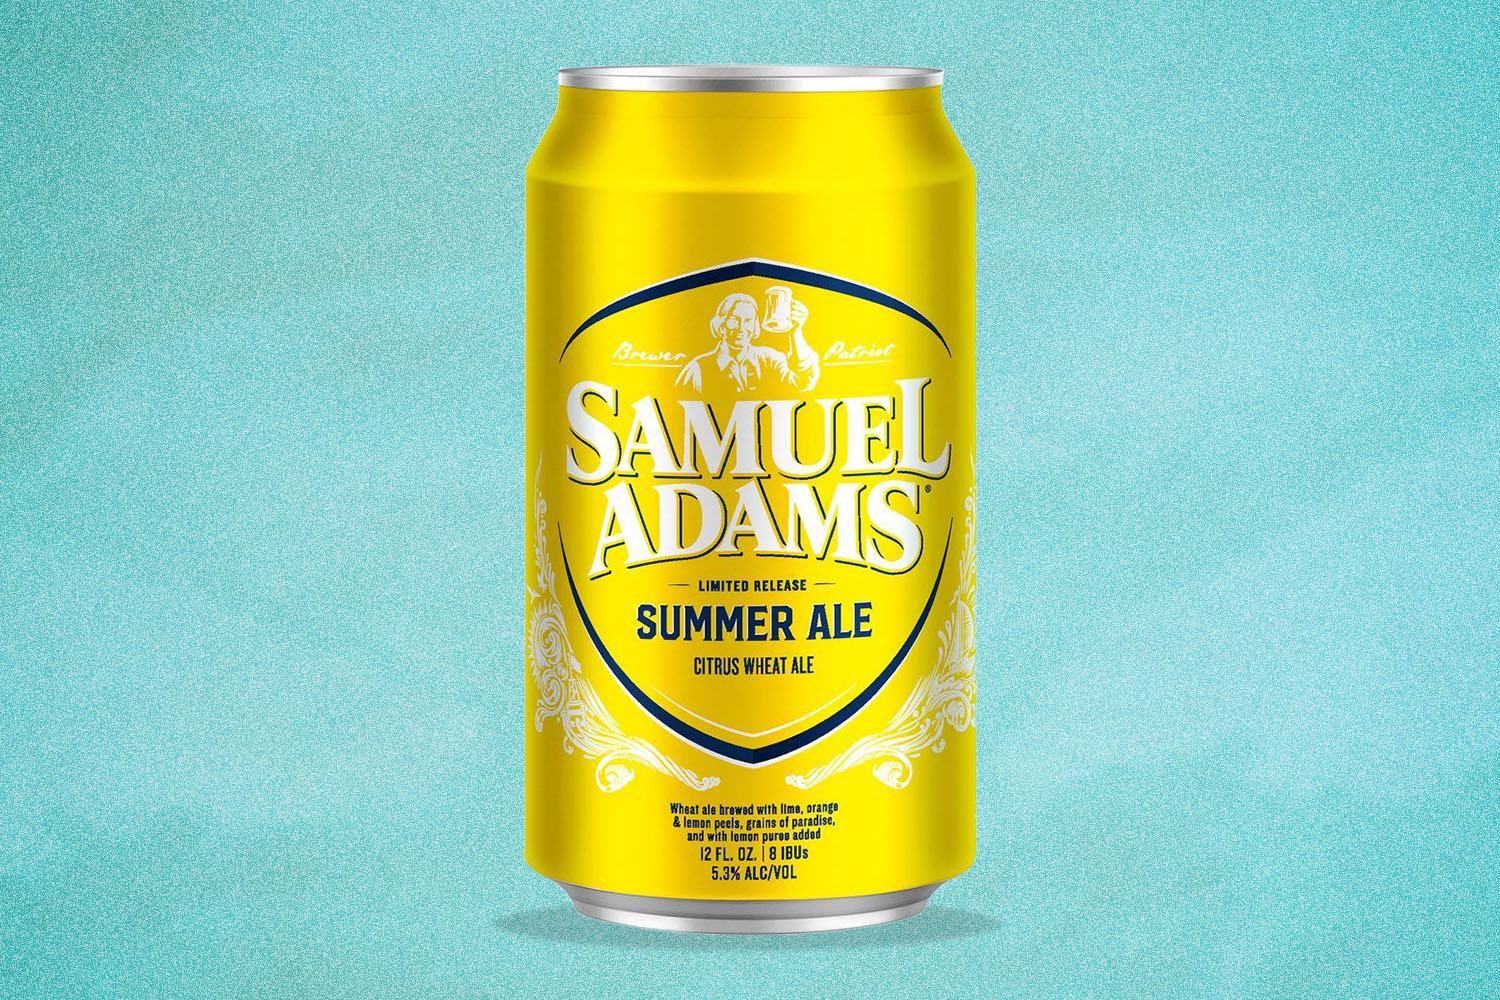 What the Heck Is a "Summer Ale," Anyway? InsideHook